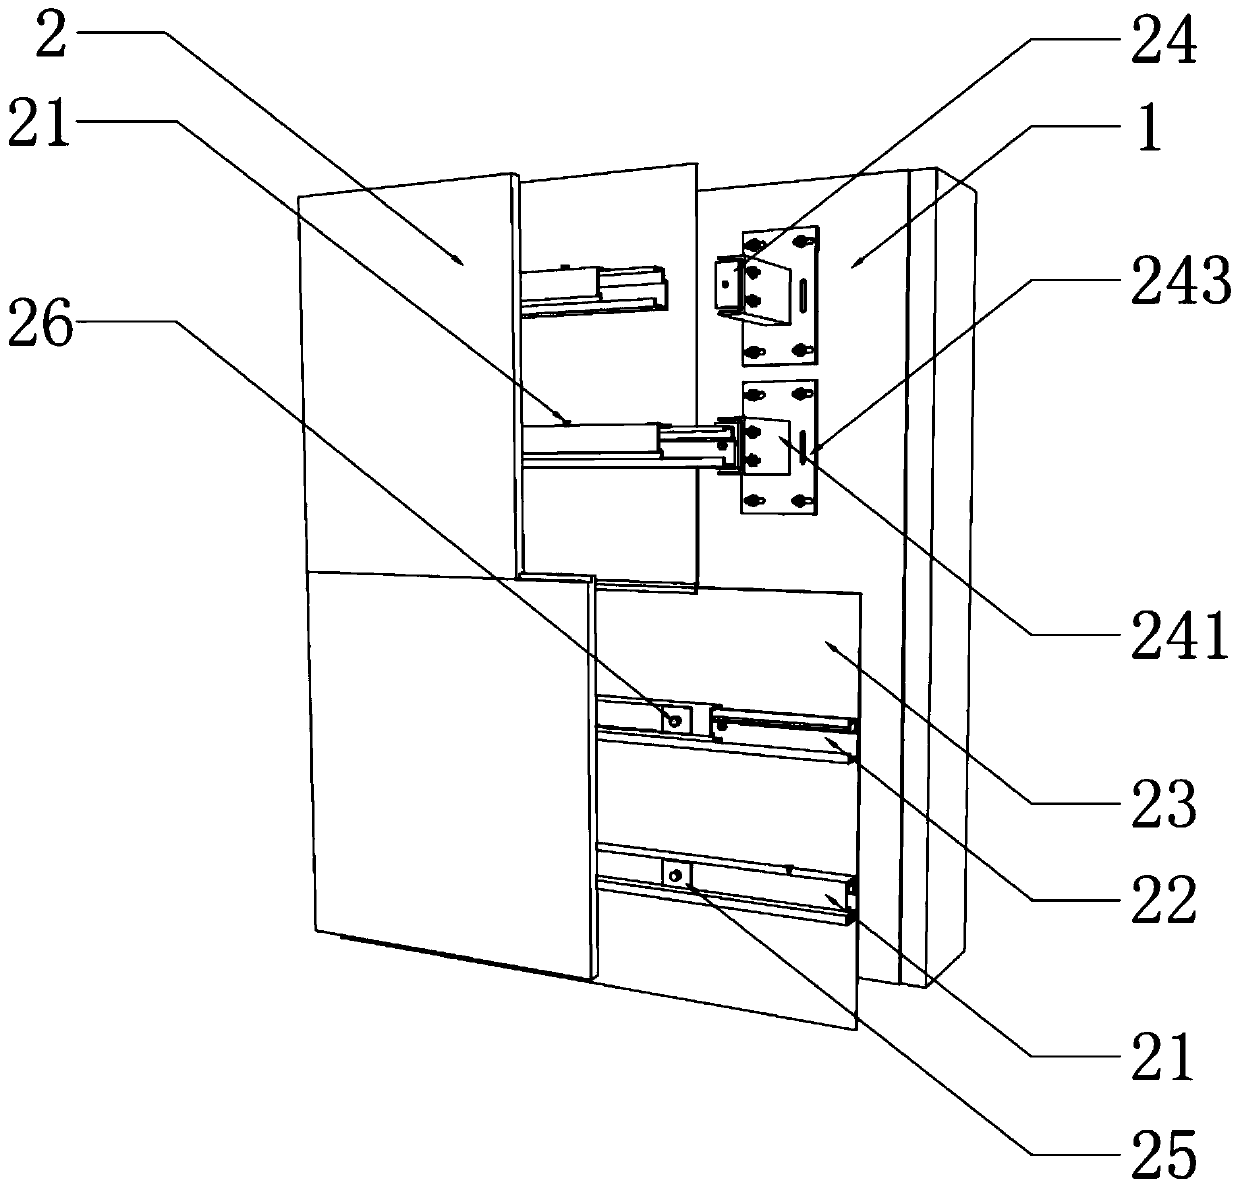 Fabricated dry-hang mounting structure for indoor large-scale water curtains